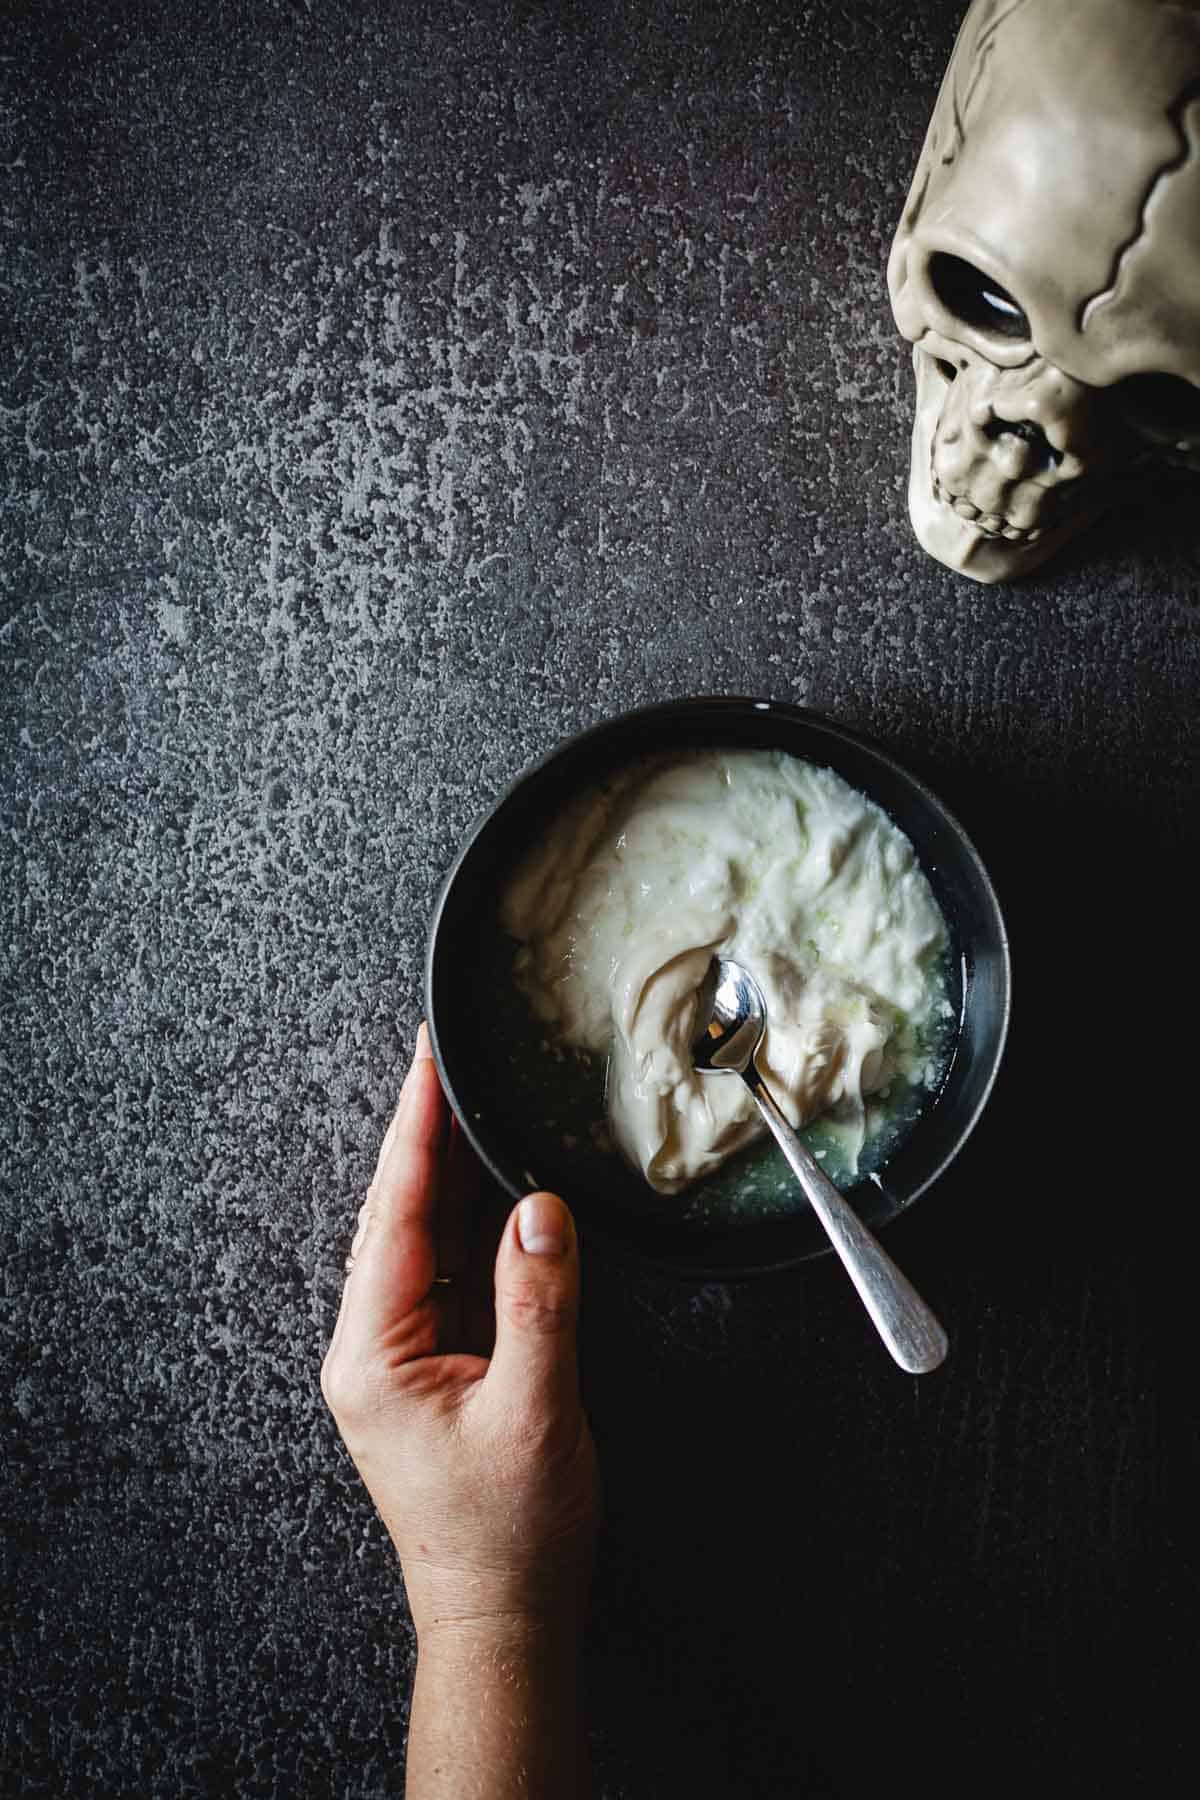 A hand holding a bowl of prepared sauce next to a skull.